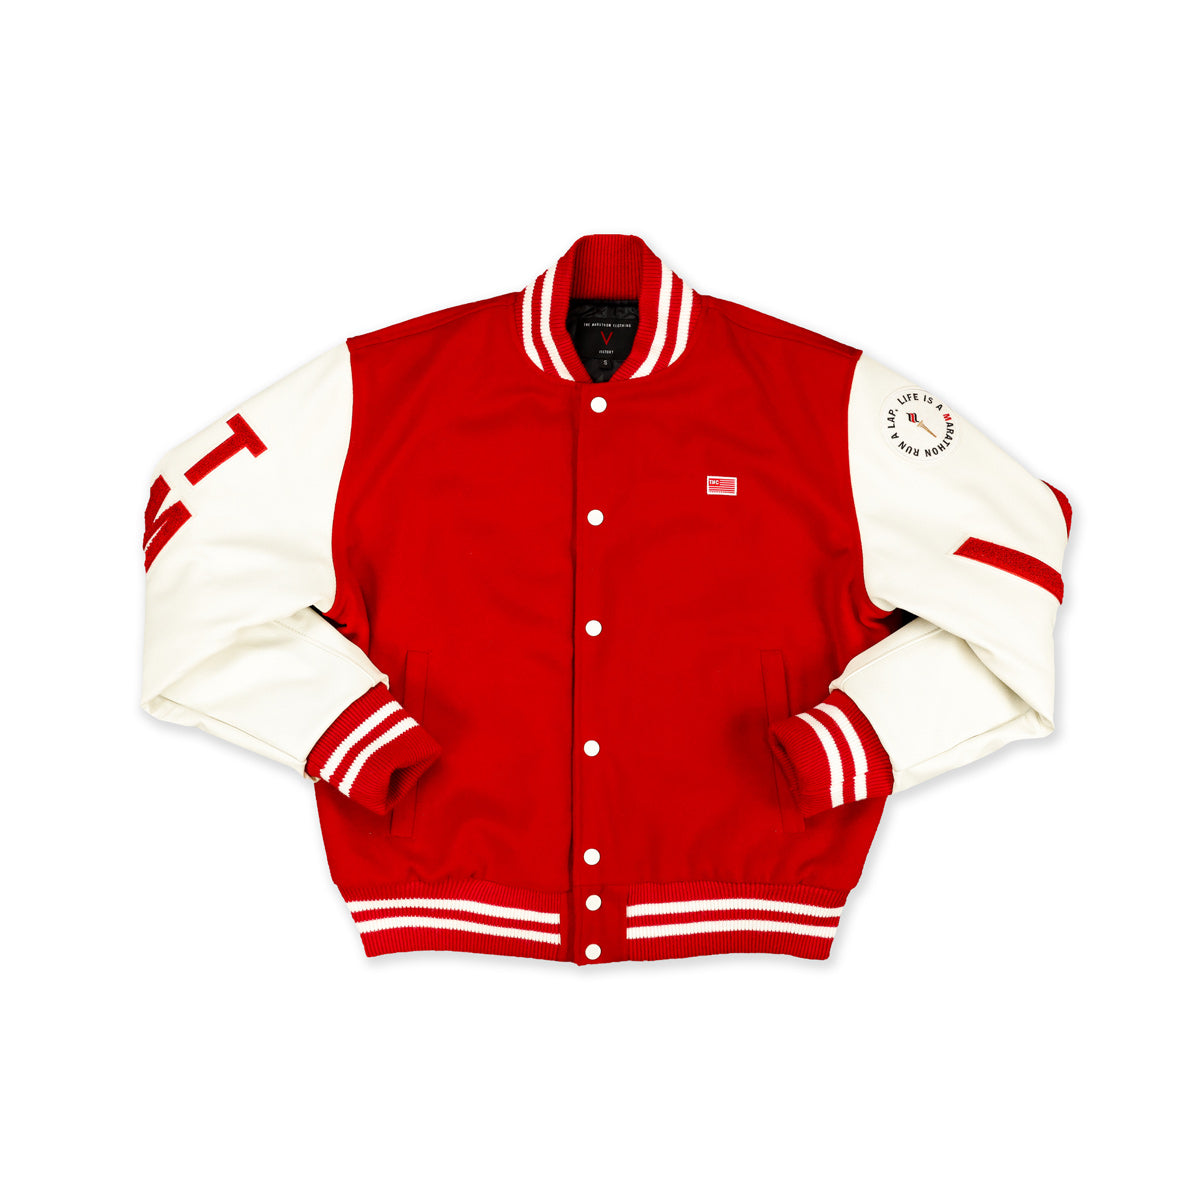 The Marathon Clothing - Crenshaw Letterman Jacket - Red - Front